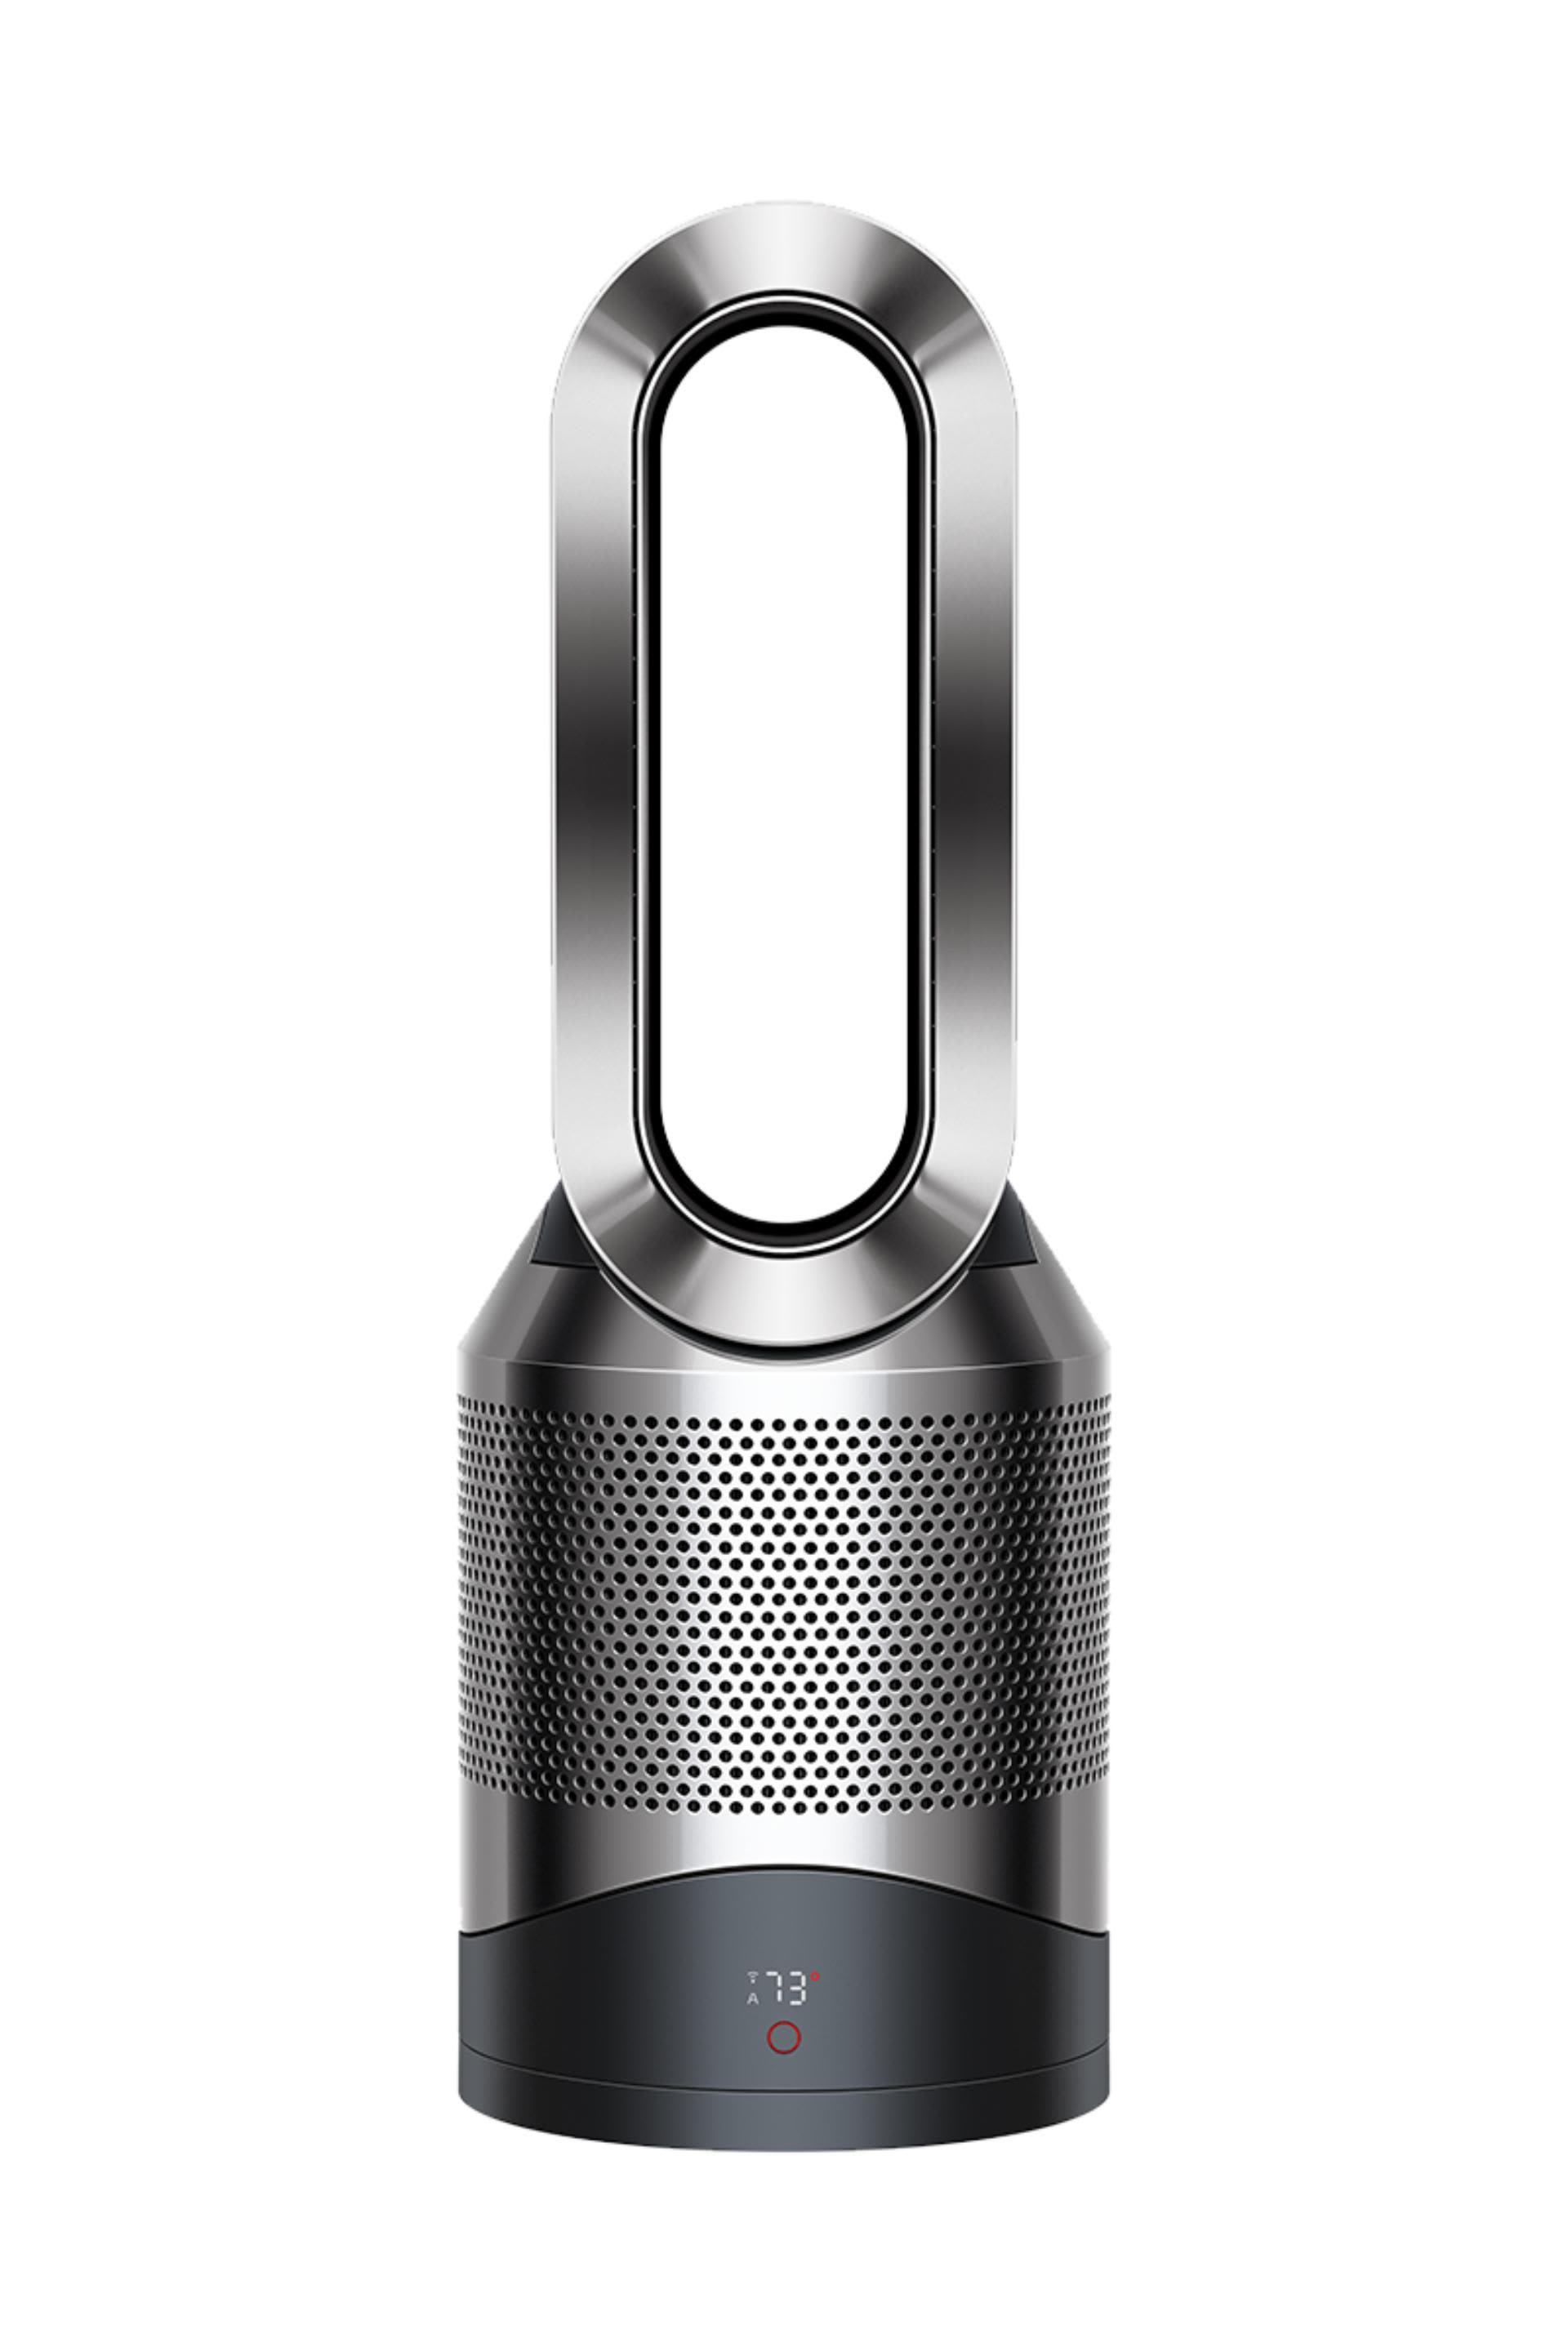 Dyson's 3-in-1 Air Purifier Is on Sale — Snag It For $120 Off